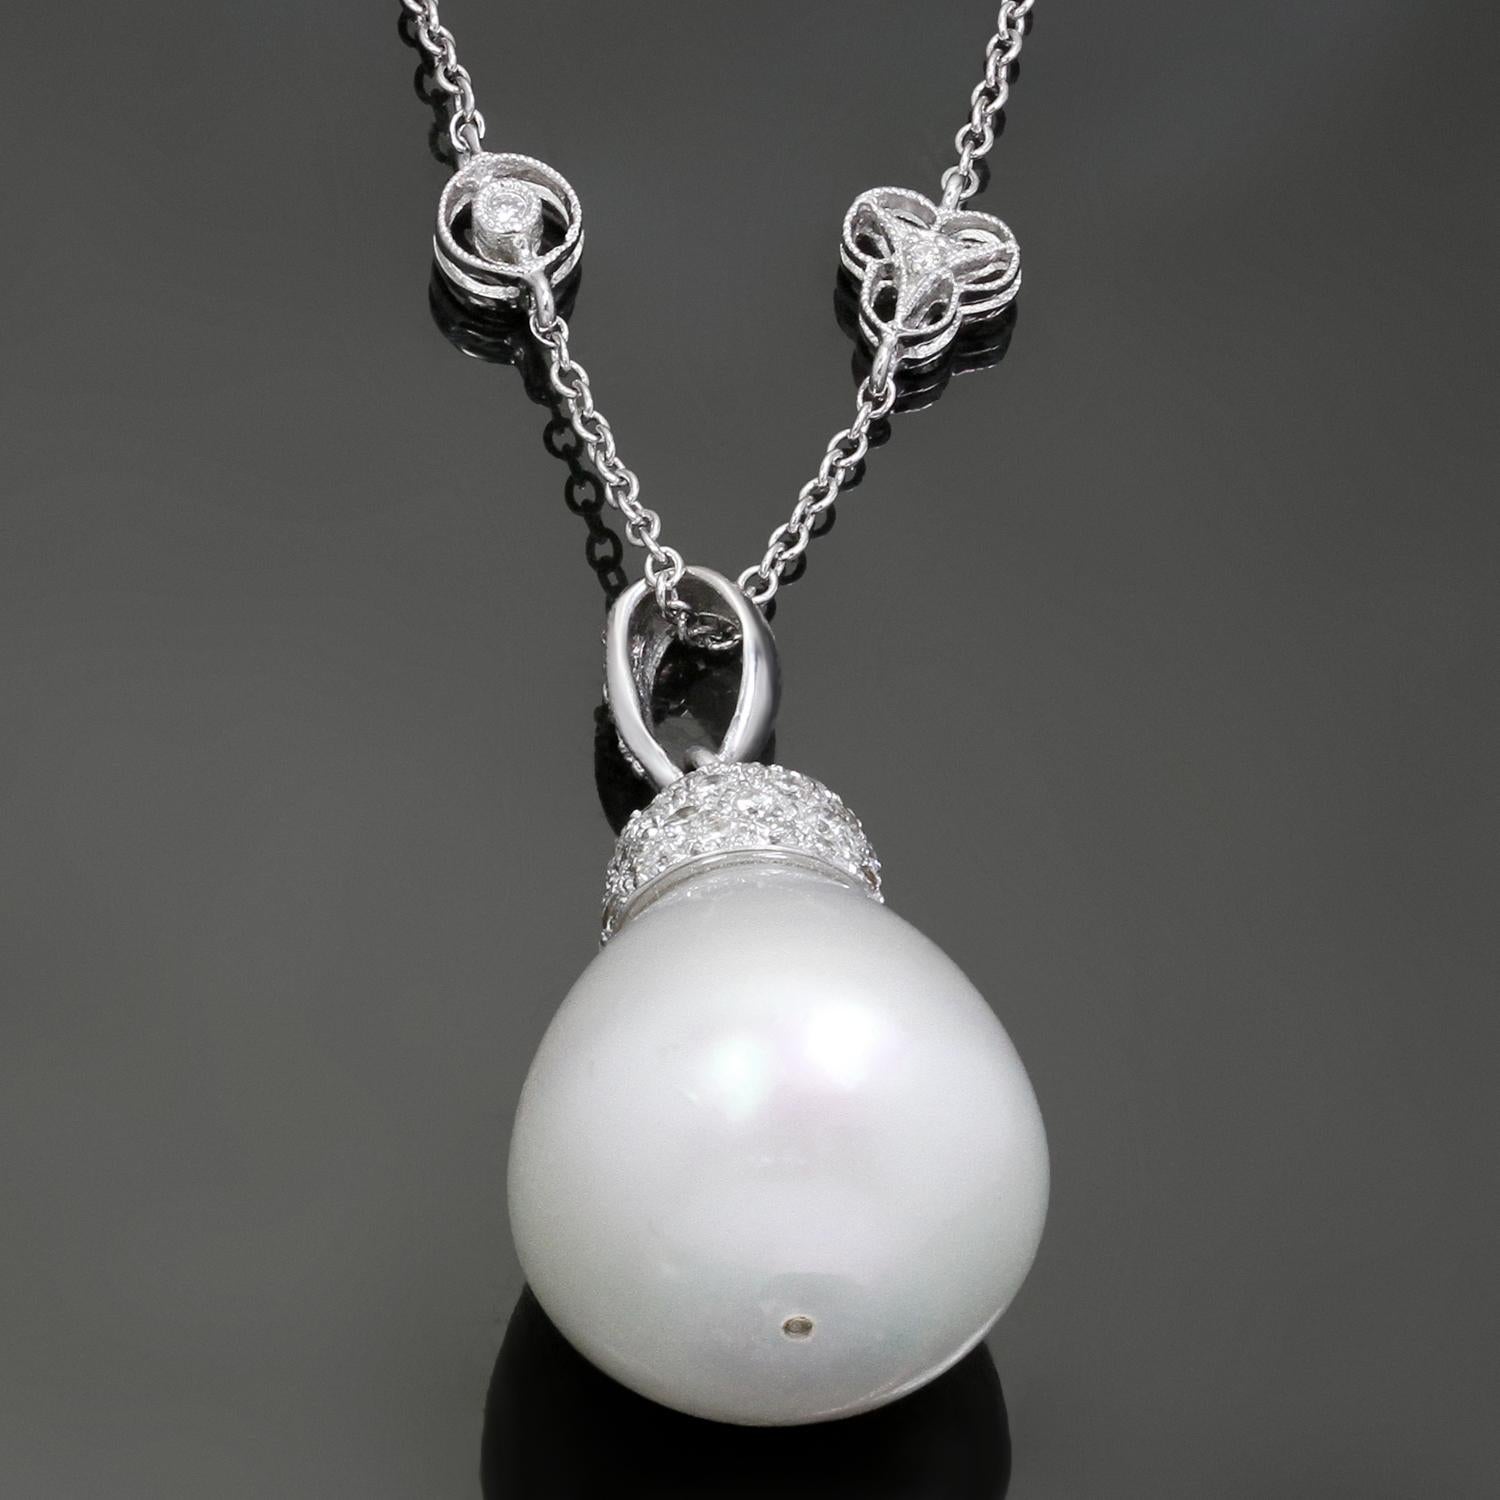 This classic Diamond By The Yard pendant necklace is crafted in 18k white gold and set with 16.0mm x 18.0mm South Sea Baroque Pearl with silver overtones, accented with brilliant-cut round diamonds of an estimated 1.65 carats. Made in United States